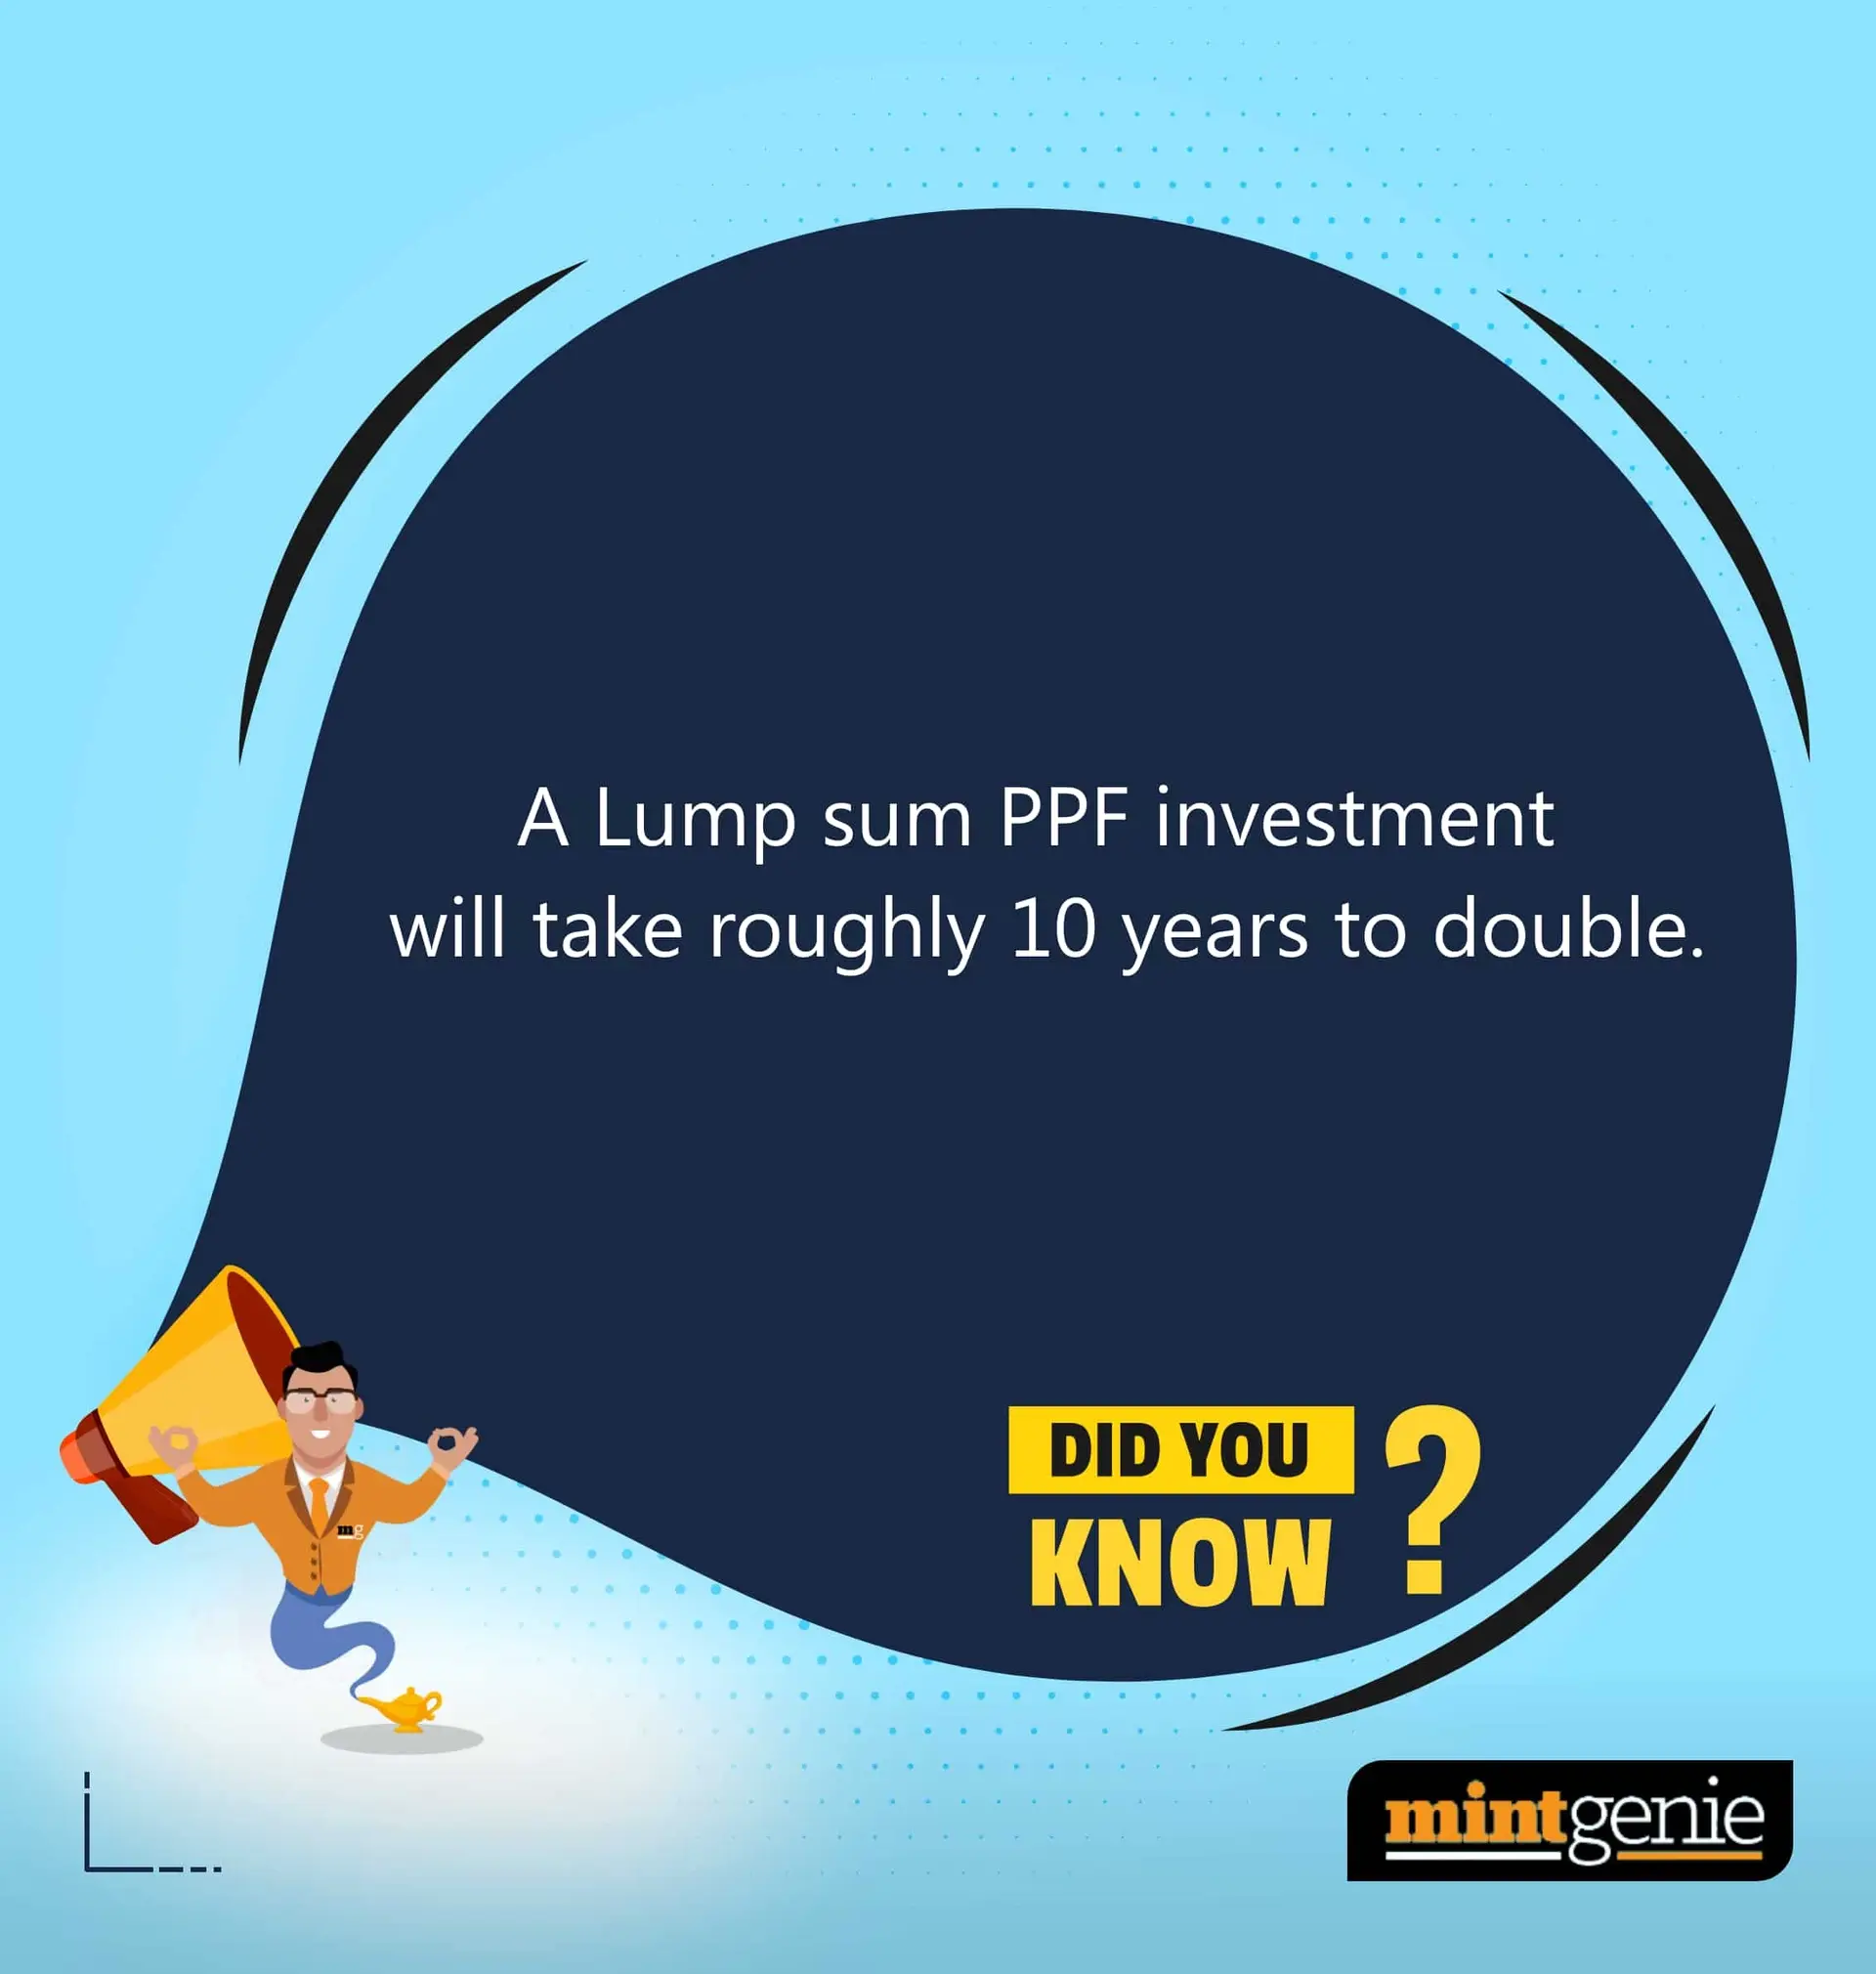 How long will it take to double the money via PPF.